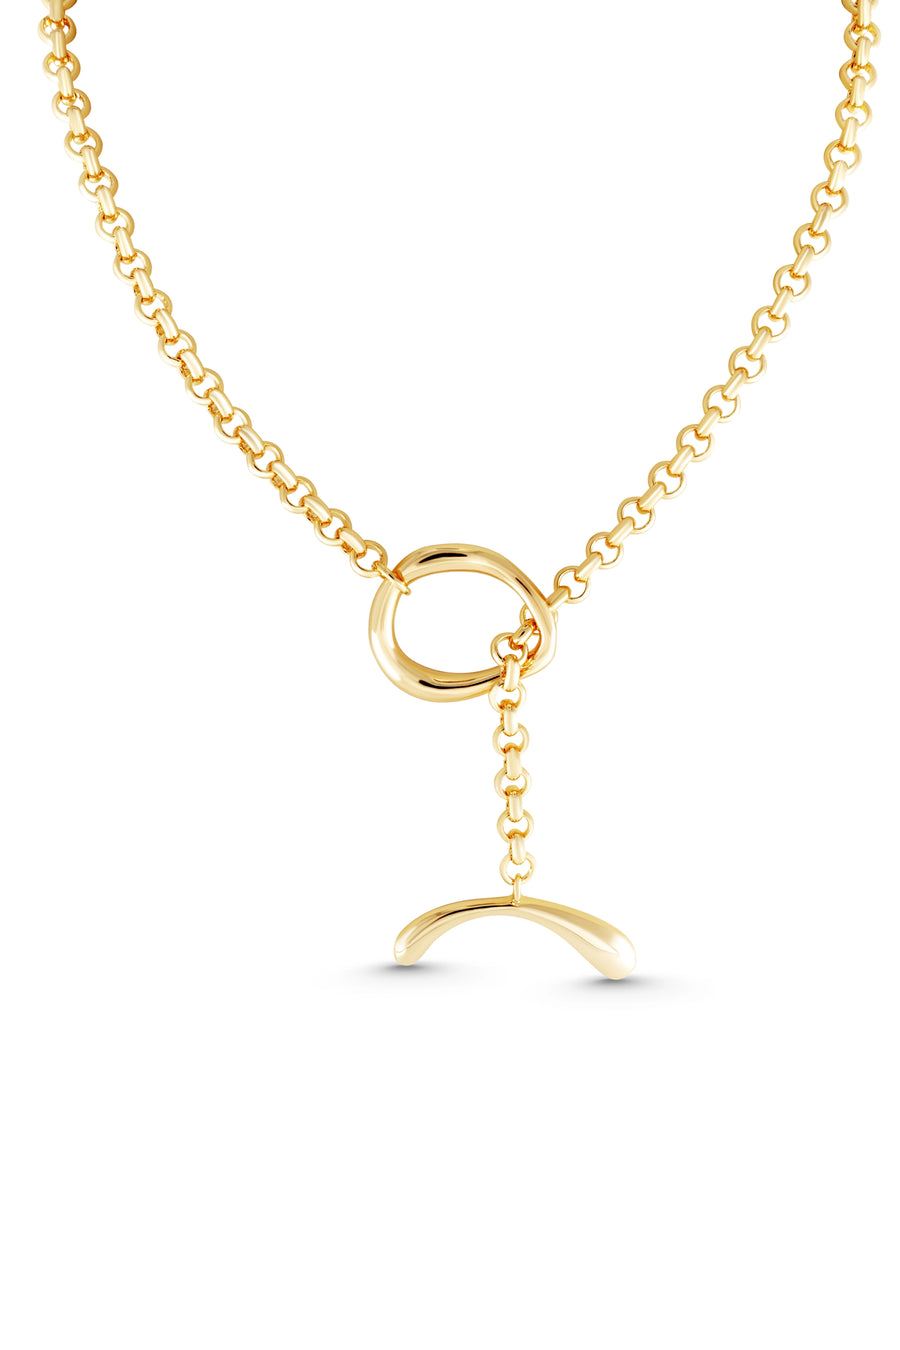 MOOD Necklace. Bow-shaped end, toggle cable chain necklace, 18K gold vermeil, handmade, hypoallergenic, water-resistant